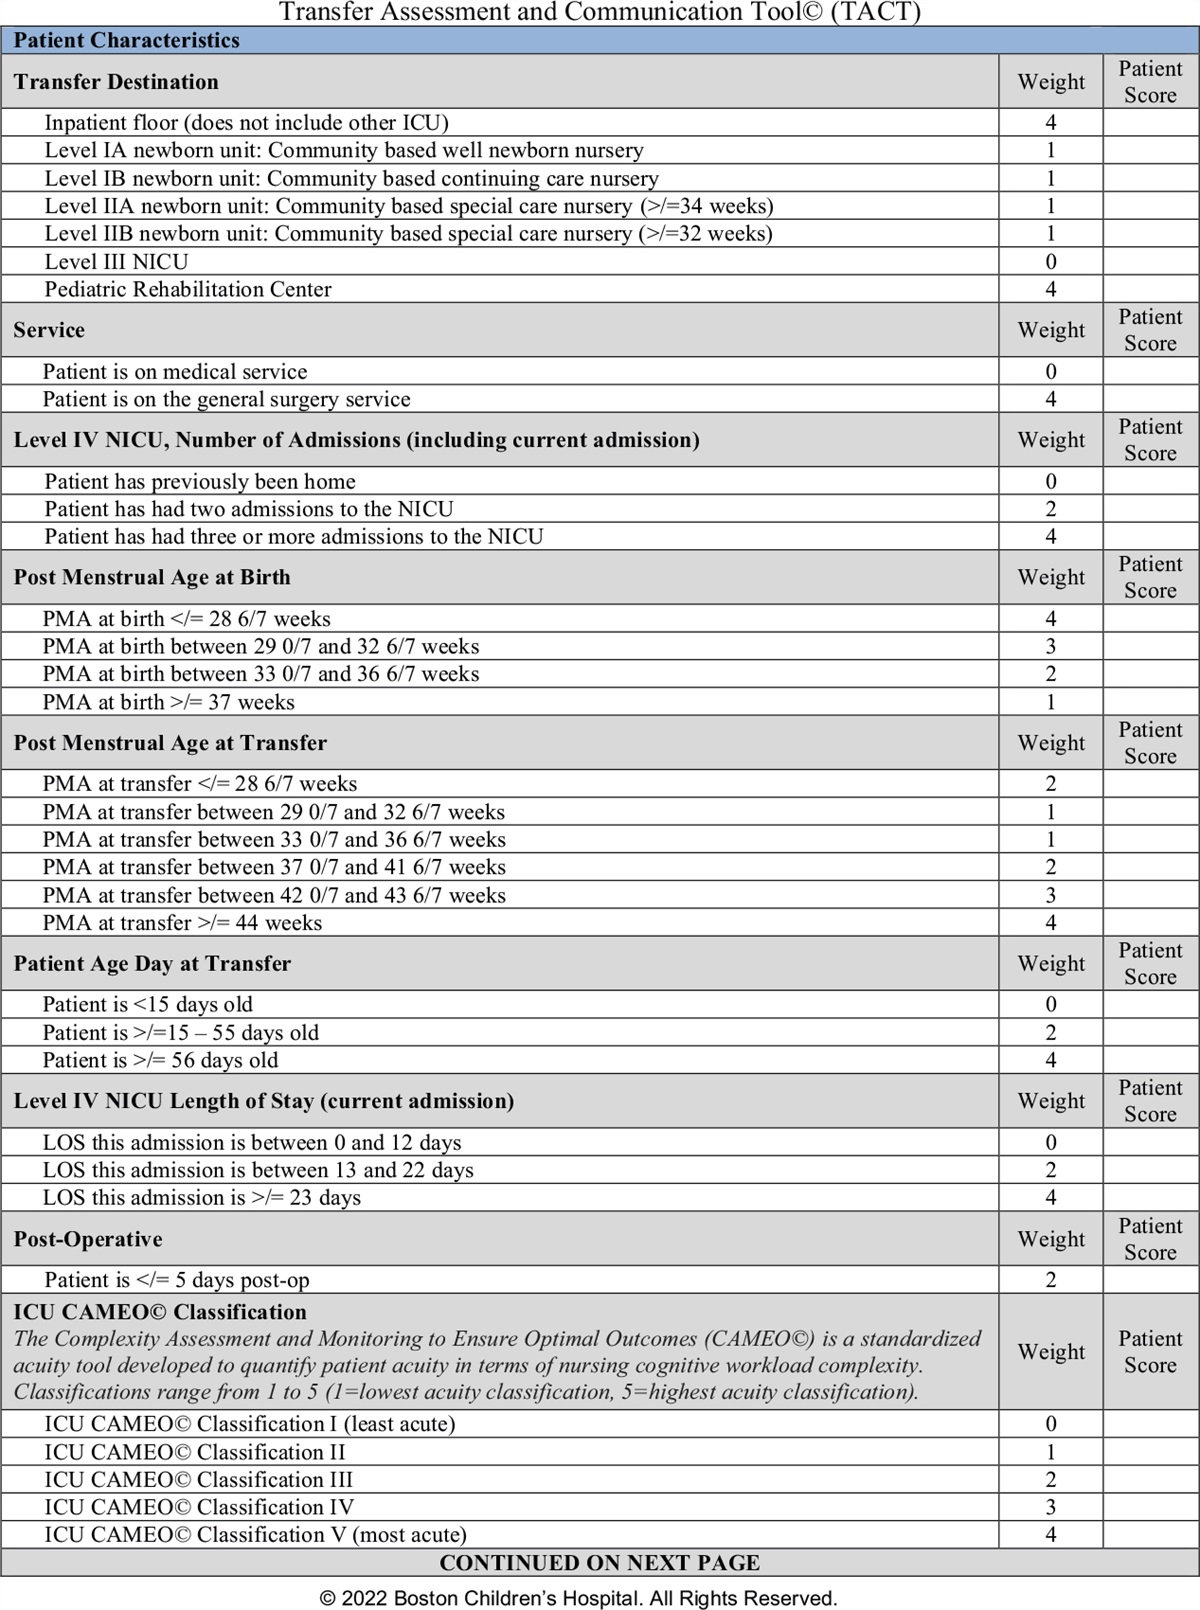 Transferring With TACT: A Novel Tool to Standardize Transfer Decisions From a Level IV NICU: Erratum